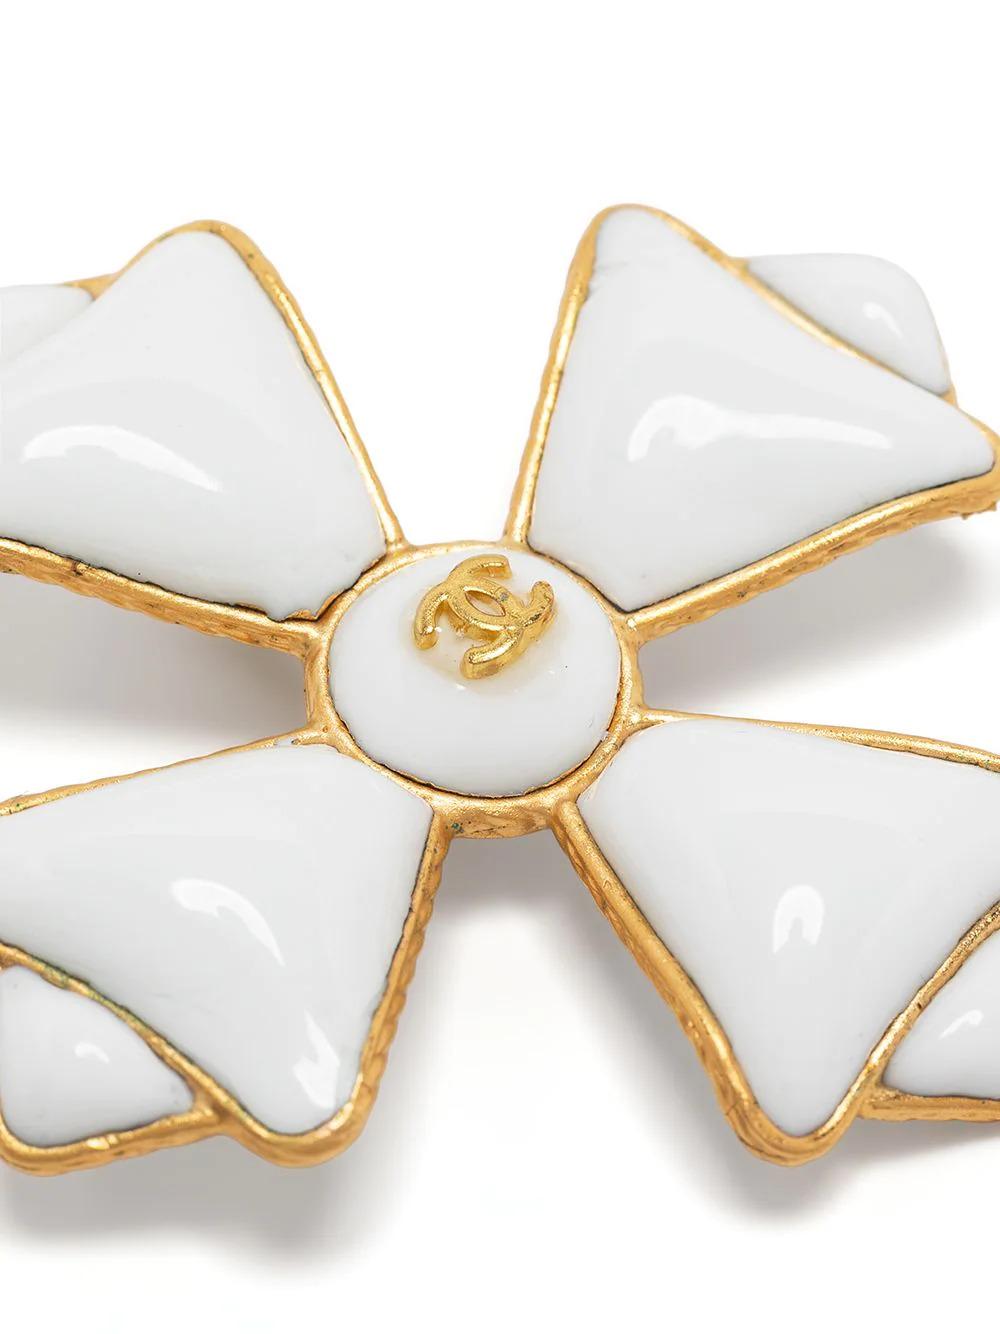 Sometimes referred to as the Amalfi cross, the maltese cross became an iconic symbol that appears across many of Chanel's designs. Created by Fulco di Verdura for Coco Chanel, the maltese cross was an interpretation of the star of the knights.